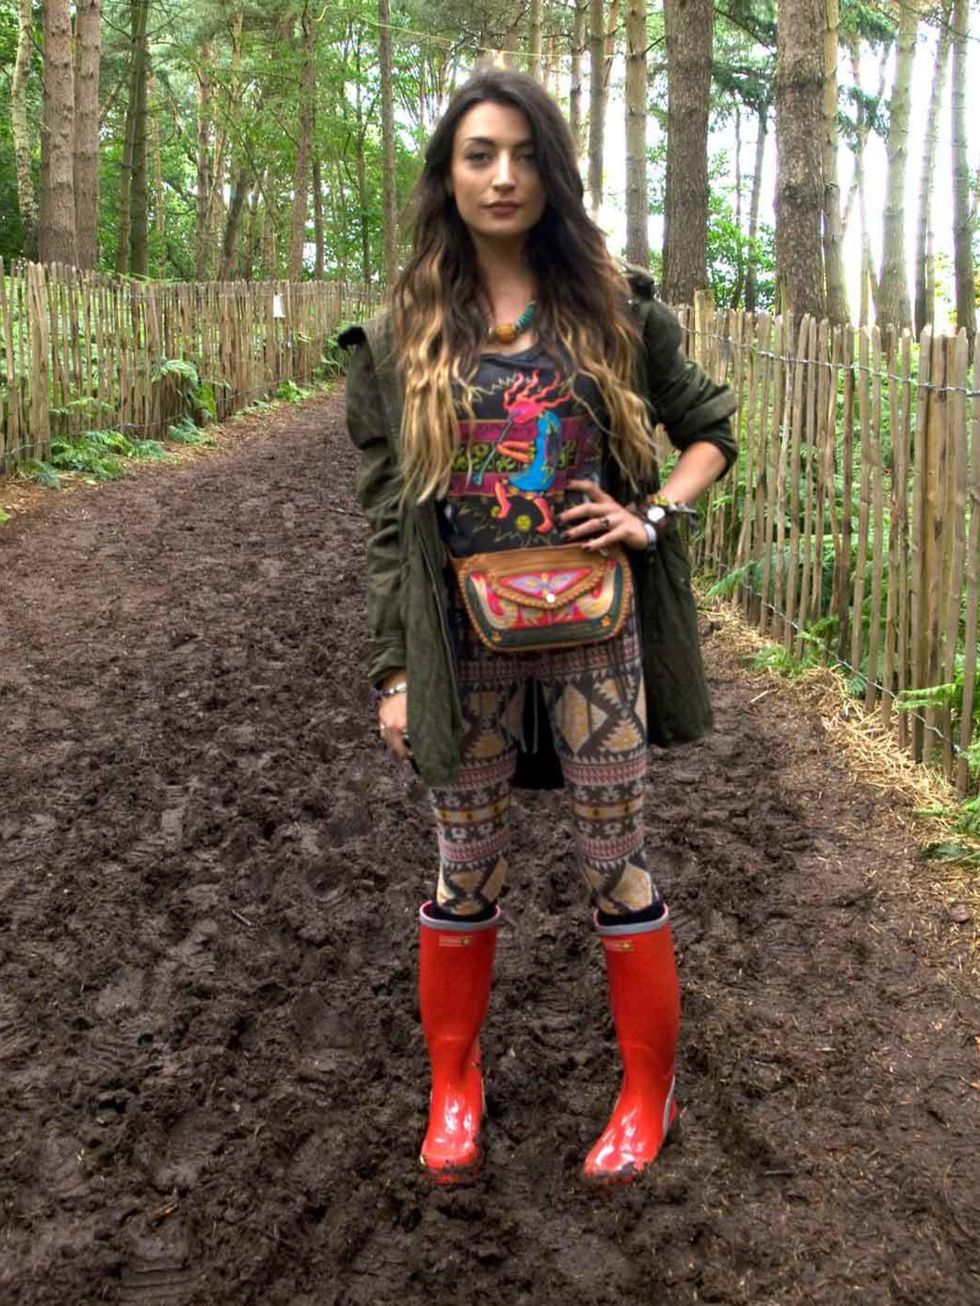 <p>Marni, 23, Fashion Blogger, London. Vintage jacket and t-shirt, River Island leggings, Havaianas wellies, Urban Outfitters bag.</p>